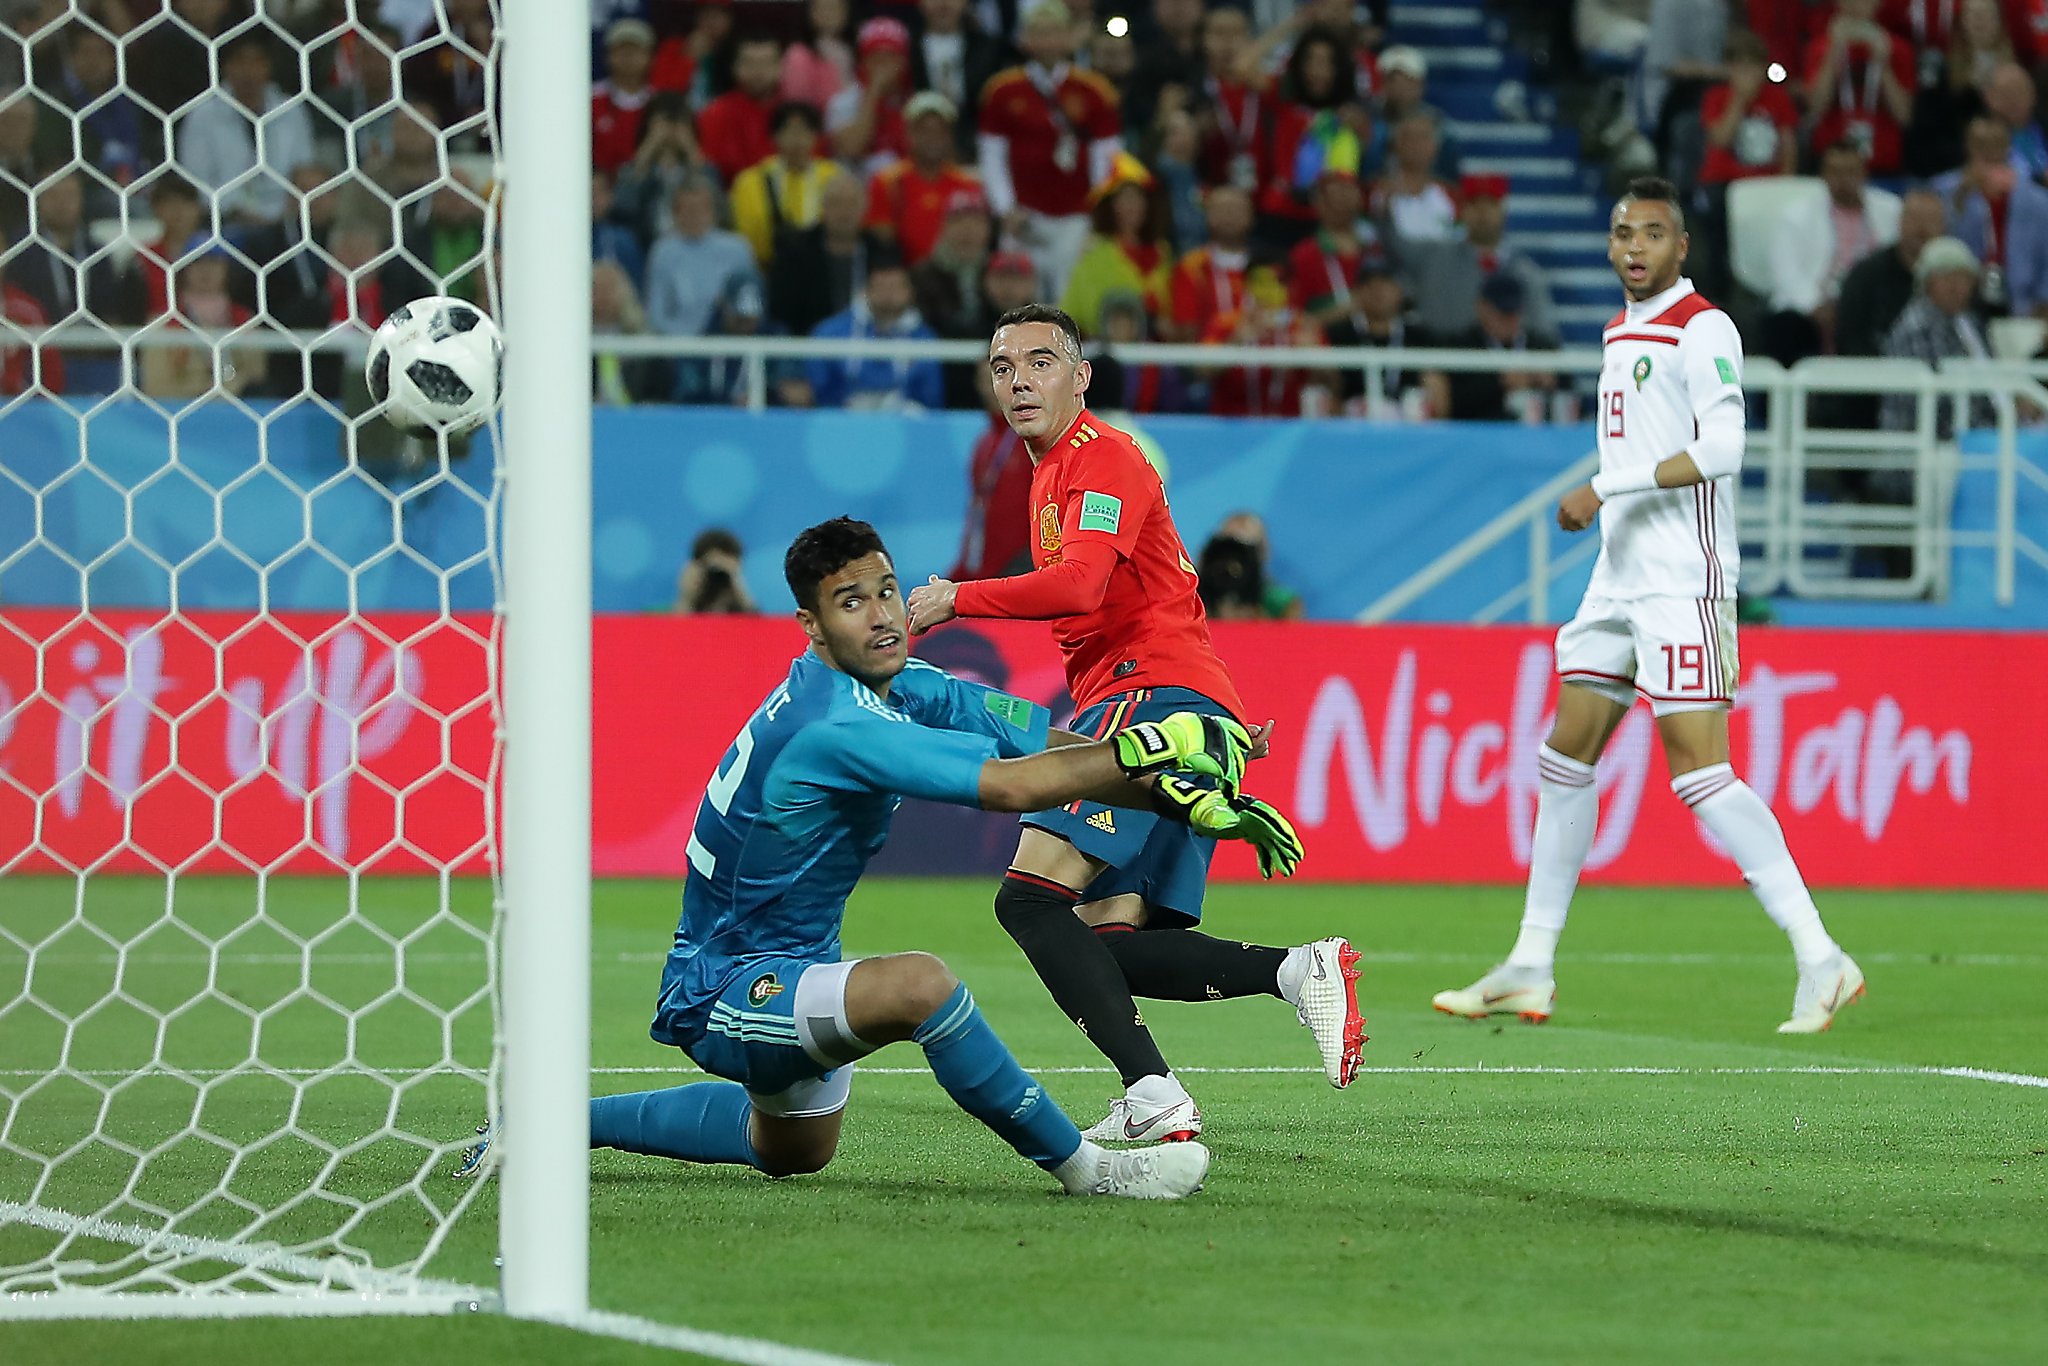 Spain draws 2-2 with Morocco, reaches round of 16